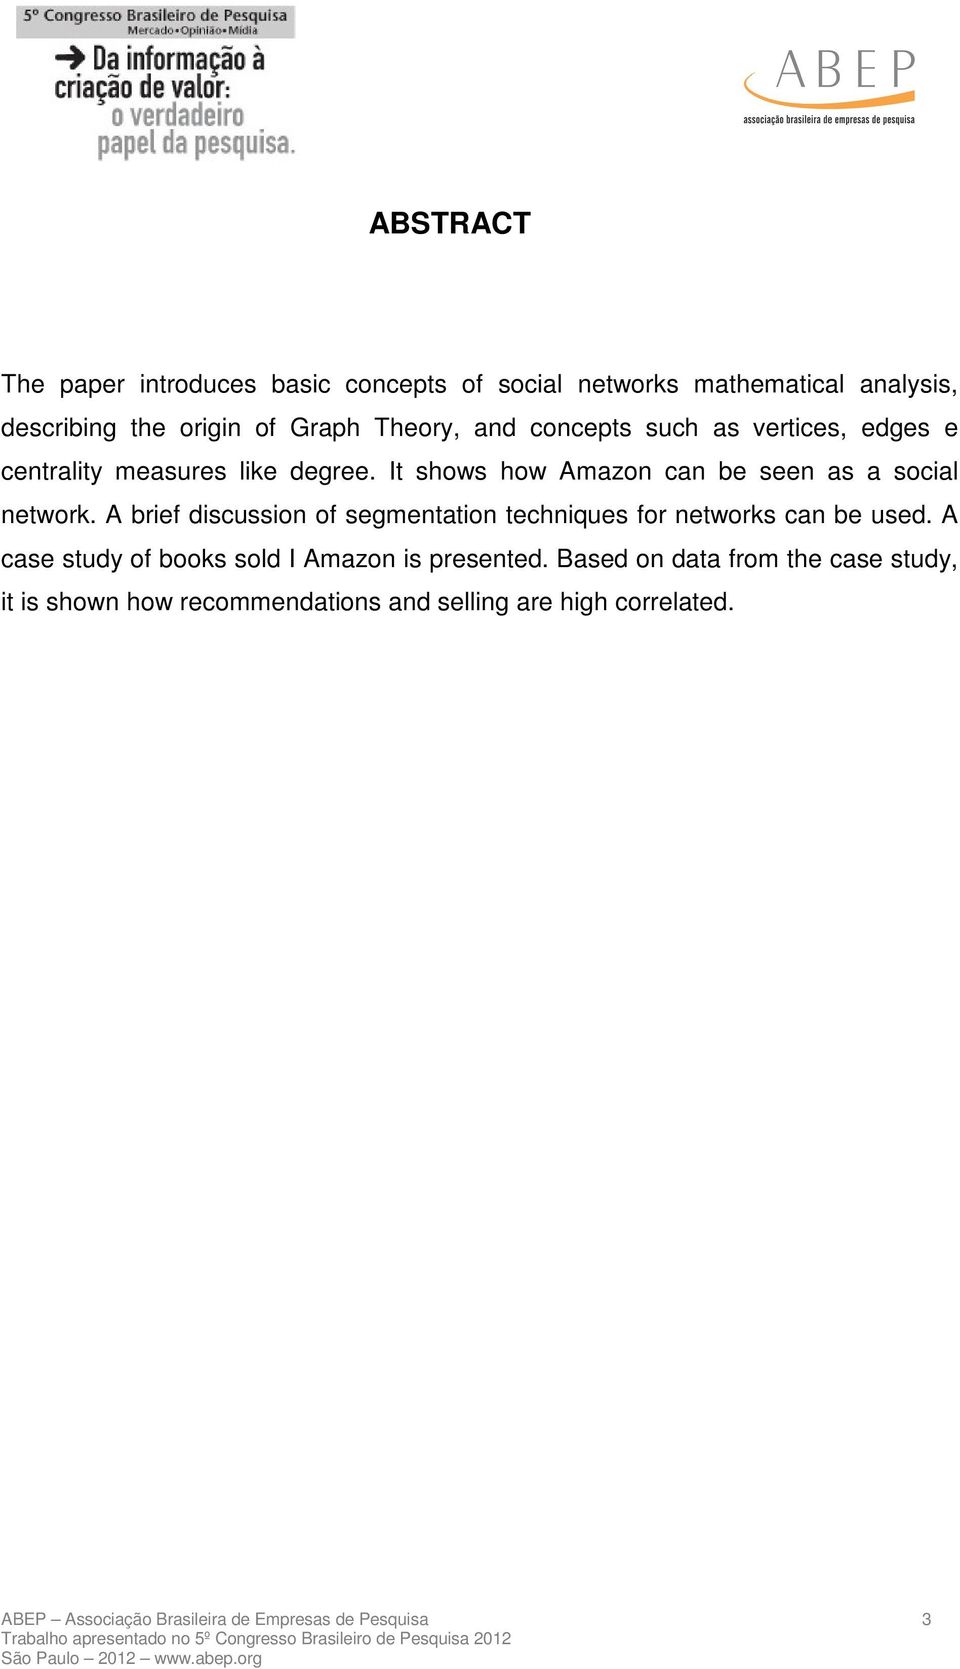 A brief discussion of segmentation techniques for networks can be used. A case study of books sold I Amazon is presented.